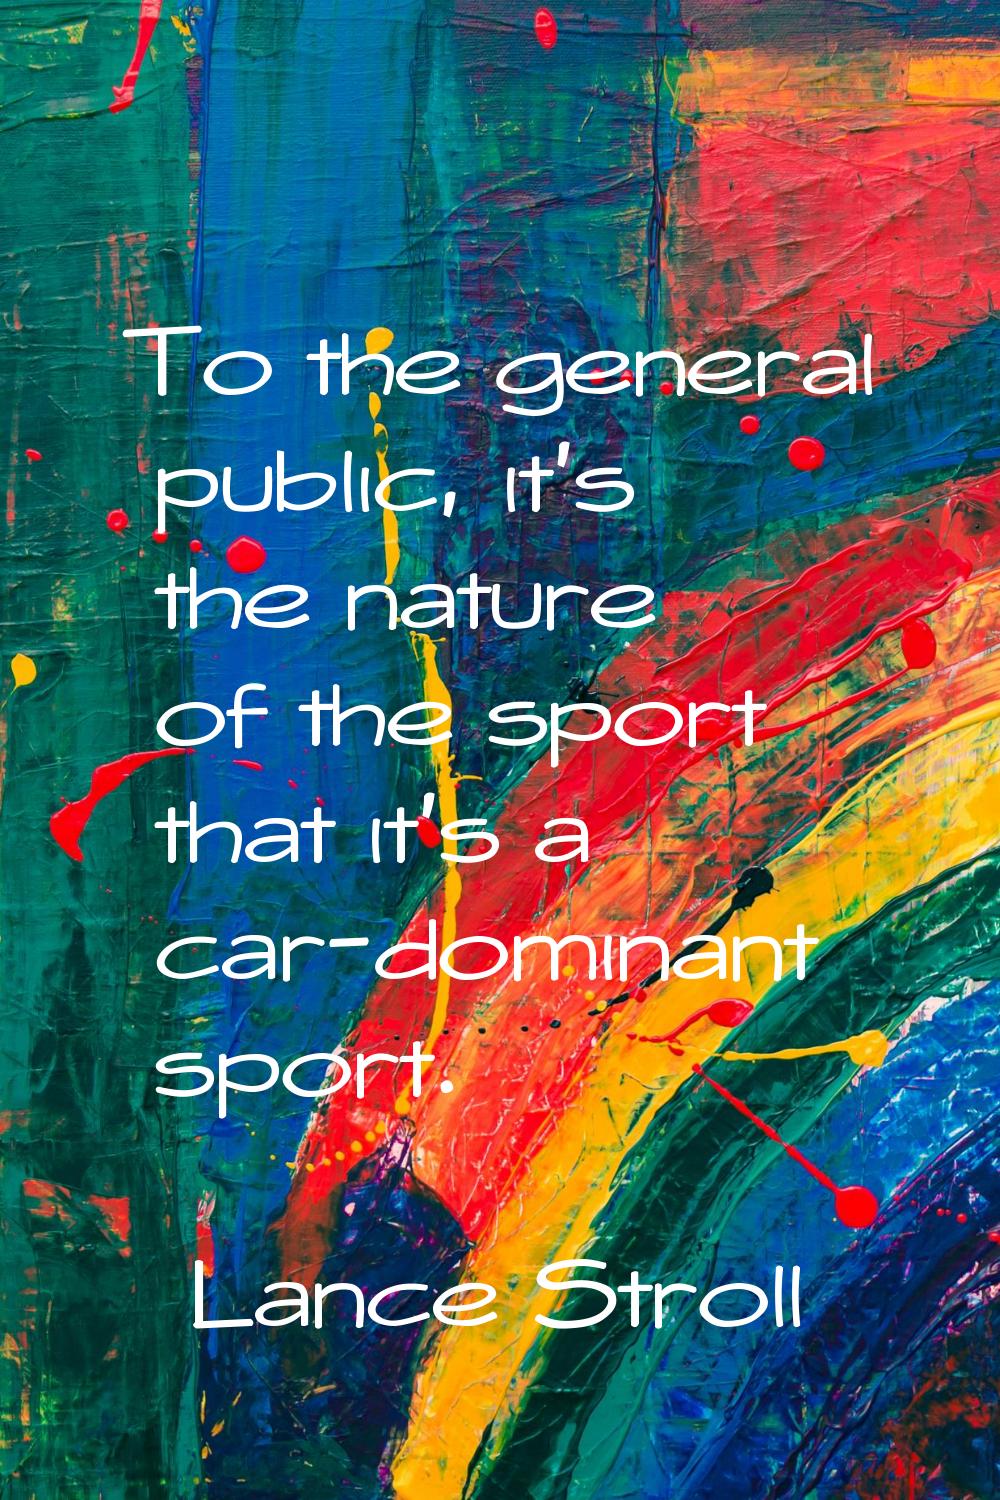 To the general public, it's the nature of the sport that it's a car-dominant sport.